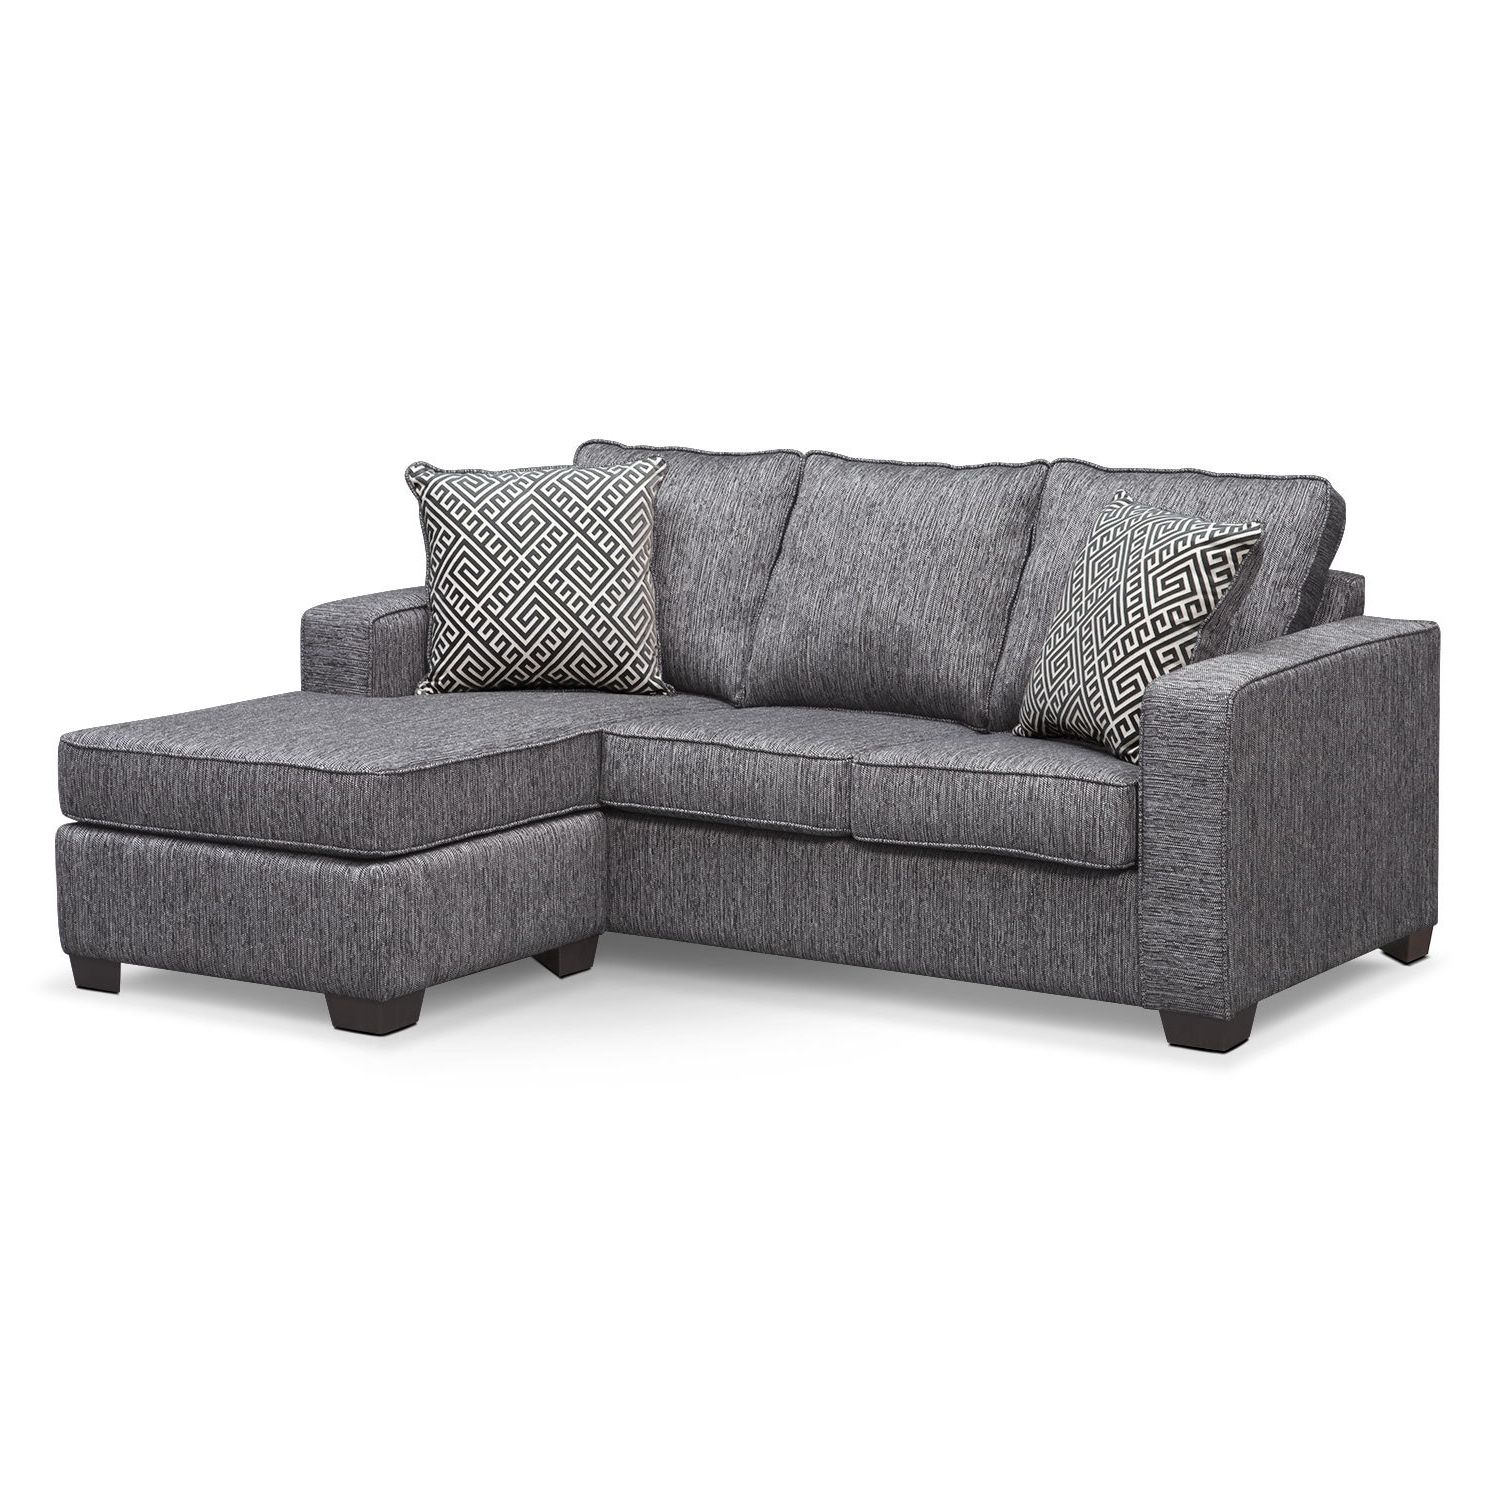 Fashionable Quincy Il Sectional Sofas Intended For Furniture : Mattress Firm Quincy Il Mattress Firm Mattress (Photo 9 of 15)